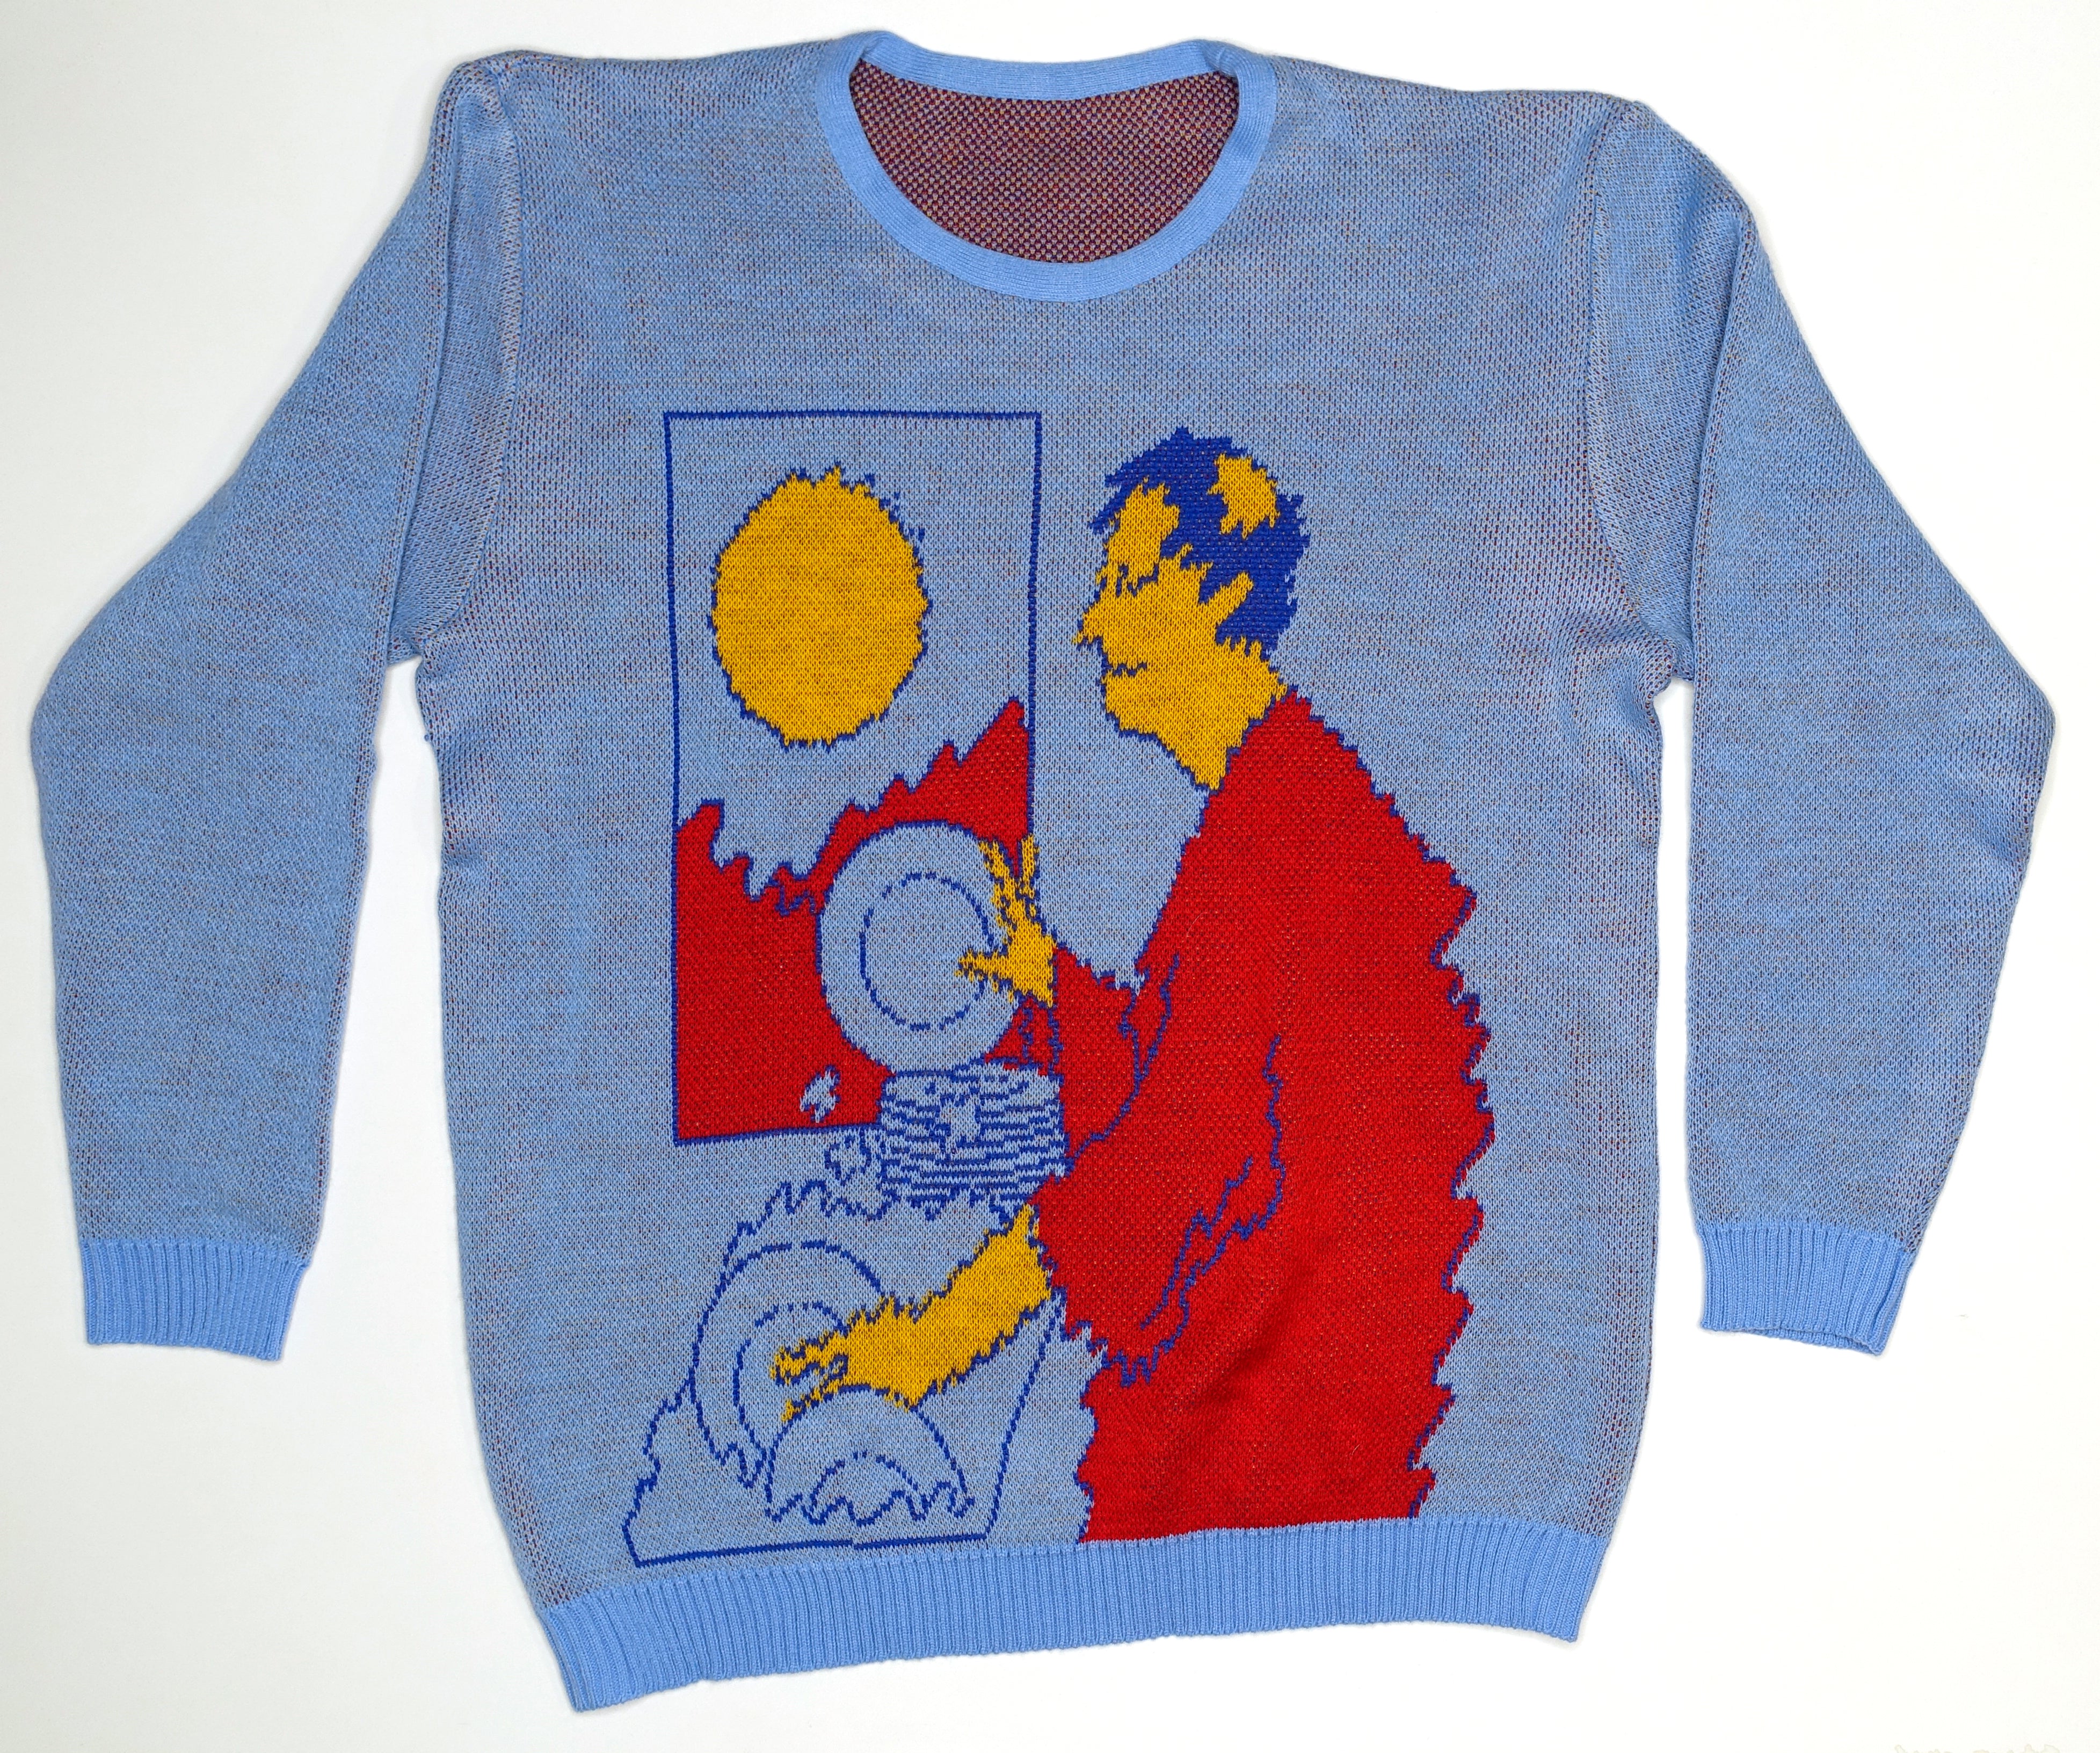 Parquet Courts - Monastic Living Knitted 2015 Tour Sweater Size Large